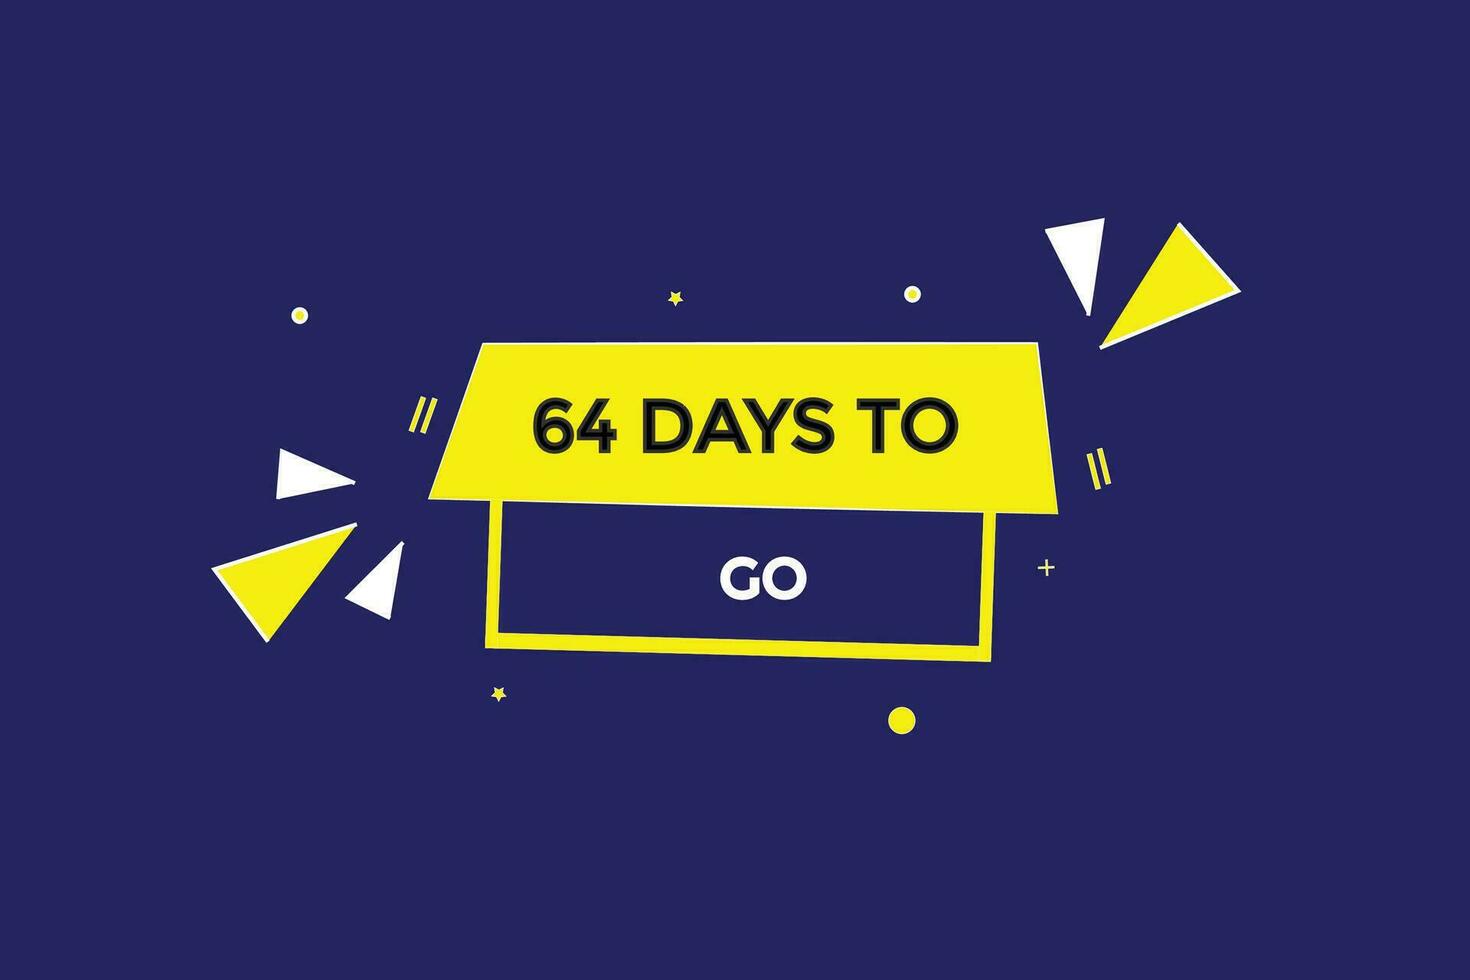 64 days, left countdown to go one time template,64 day countdown left banner label button vector